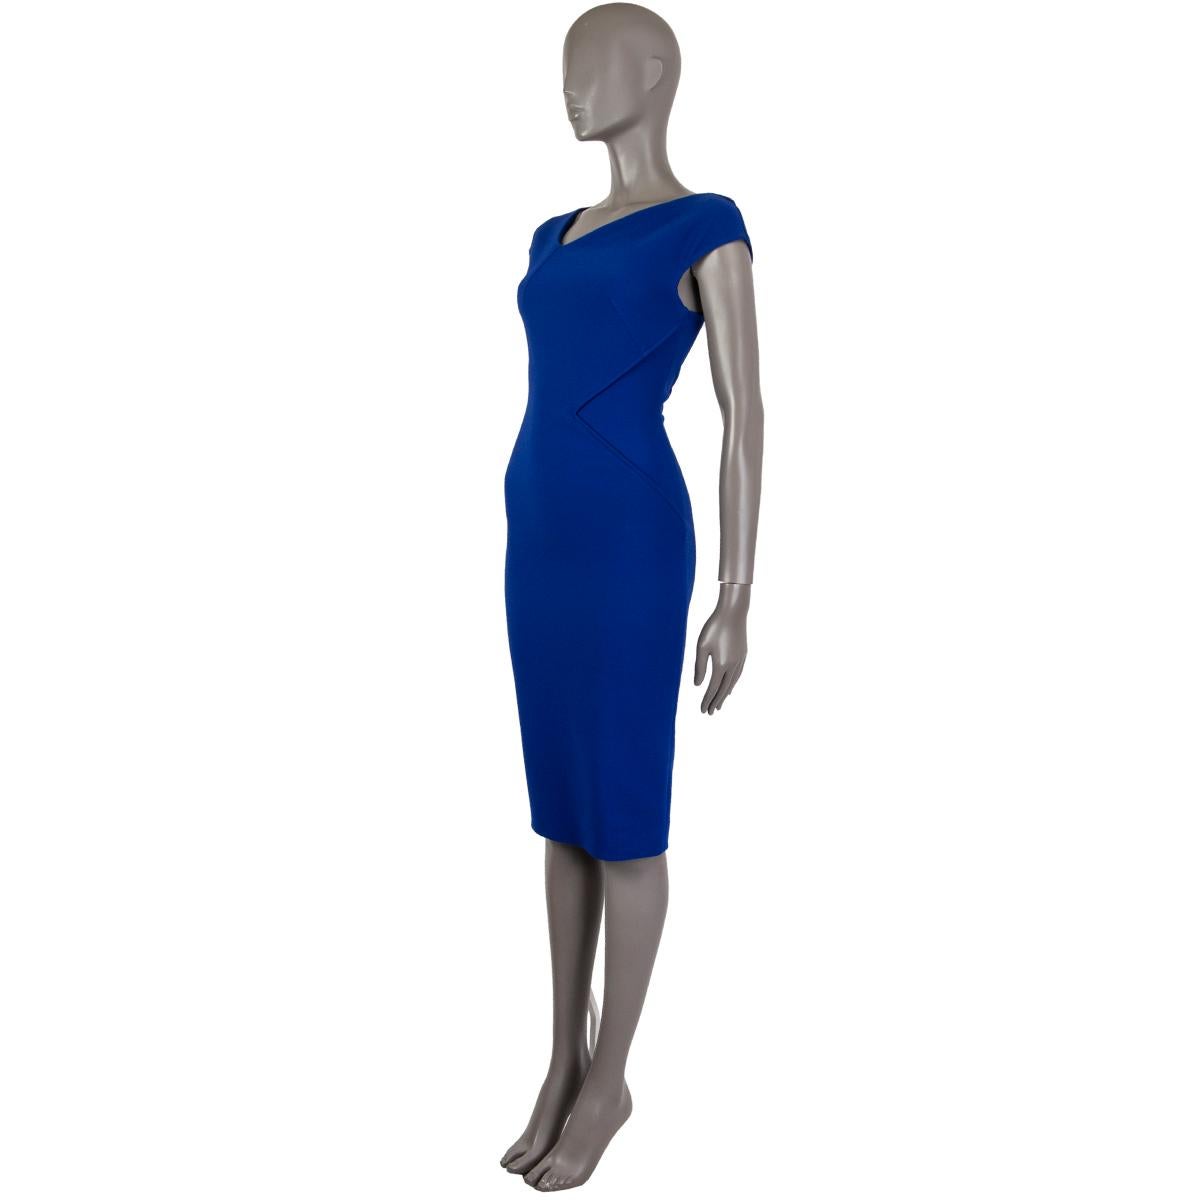 100% authentic Roland Mouret classic sheath dress in electric blue polyester (67%) viscose (29%) elastane (4%) with a close fit, triangular waist detail, cap-sleeves, V-neck and a slit in the back. Unlined. Closes with a golden zipper in the back.